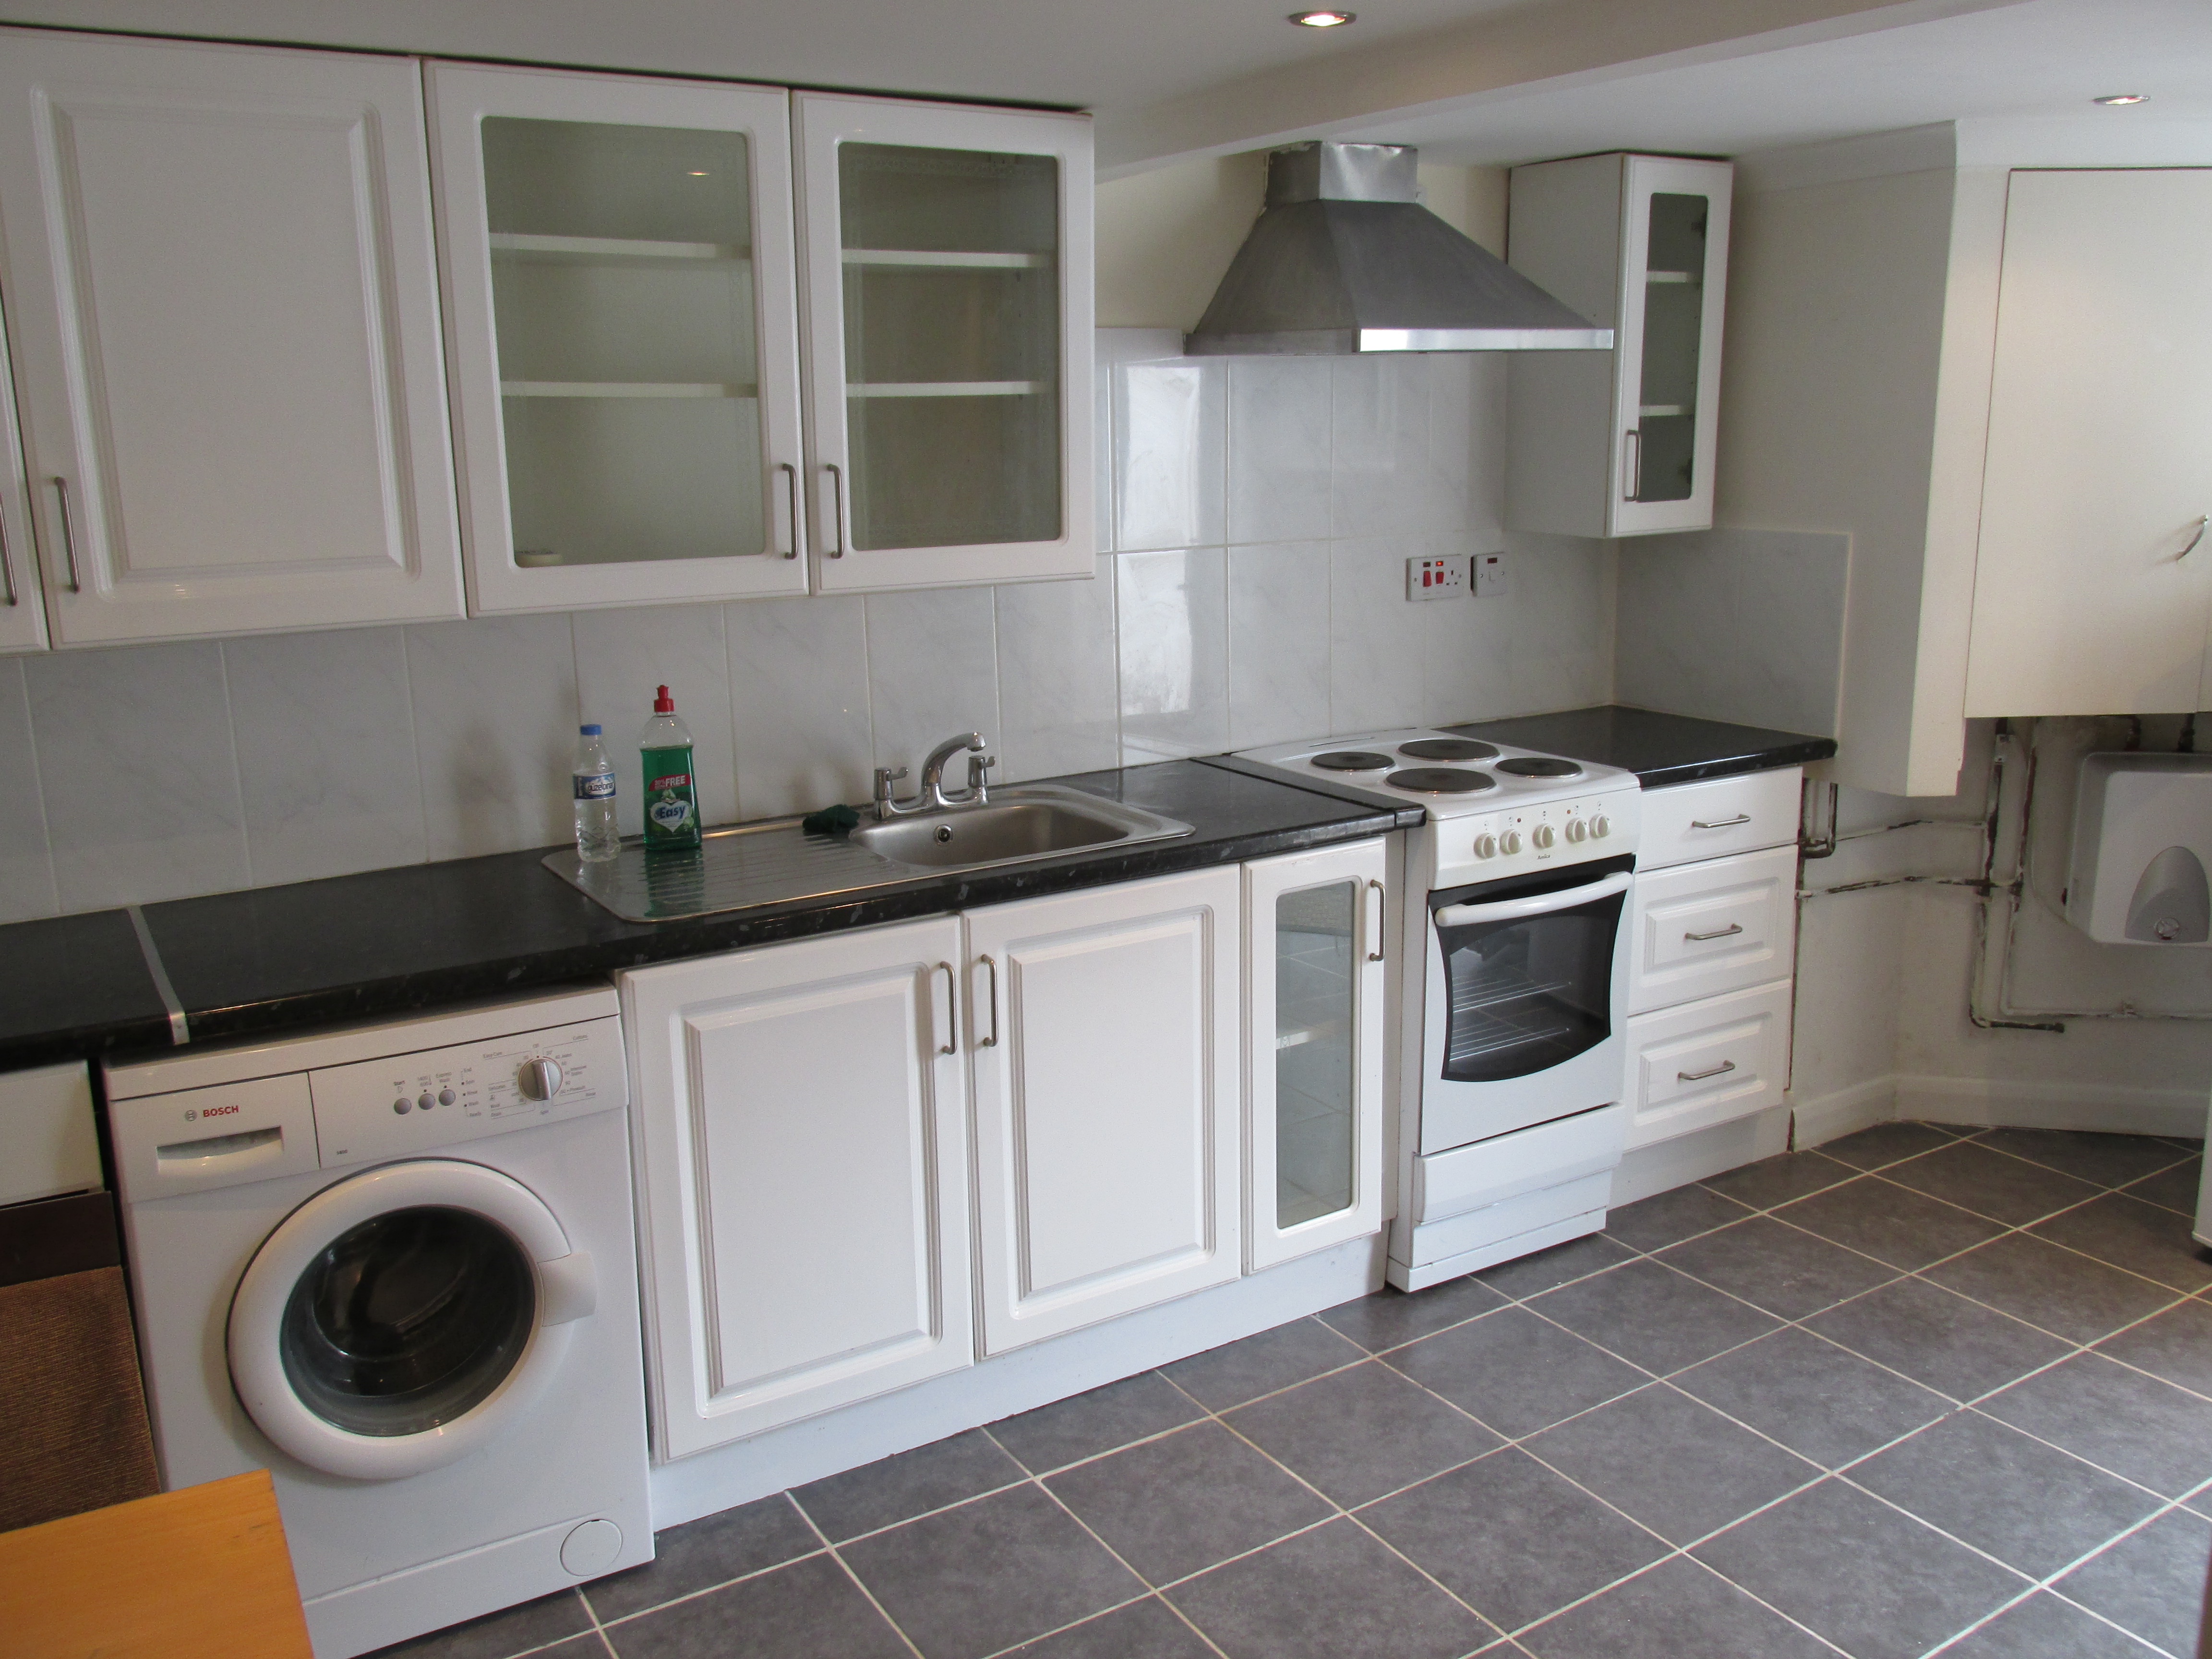 Studio flat located in Lower Clapton with separate kitchen bills included expect electricity. Tel.02034781997
